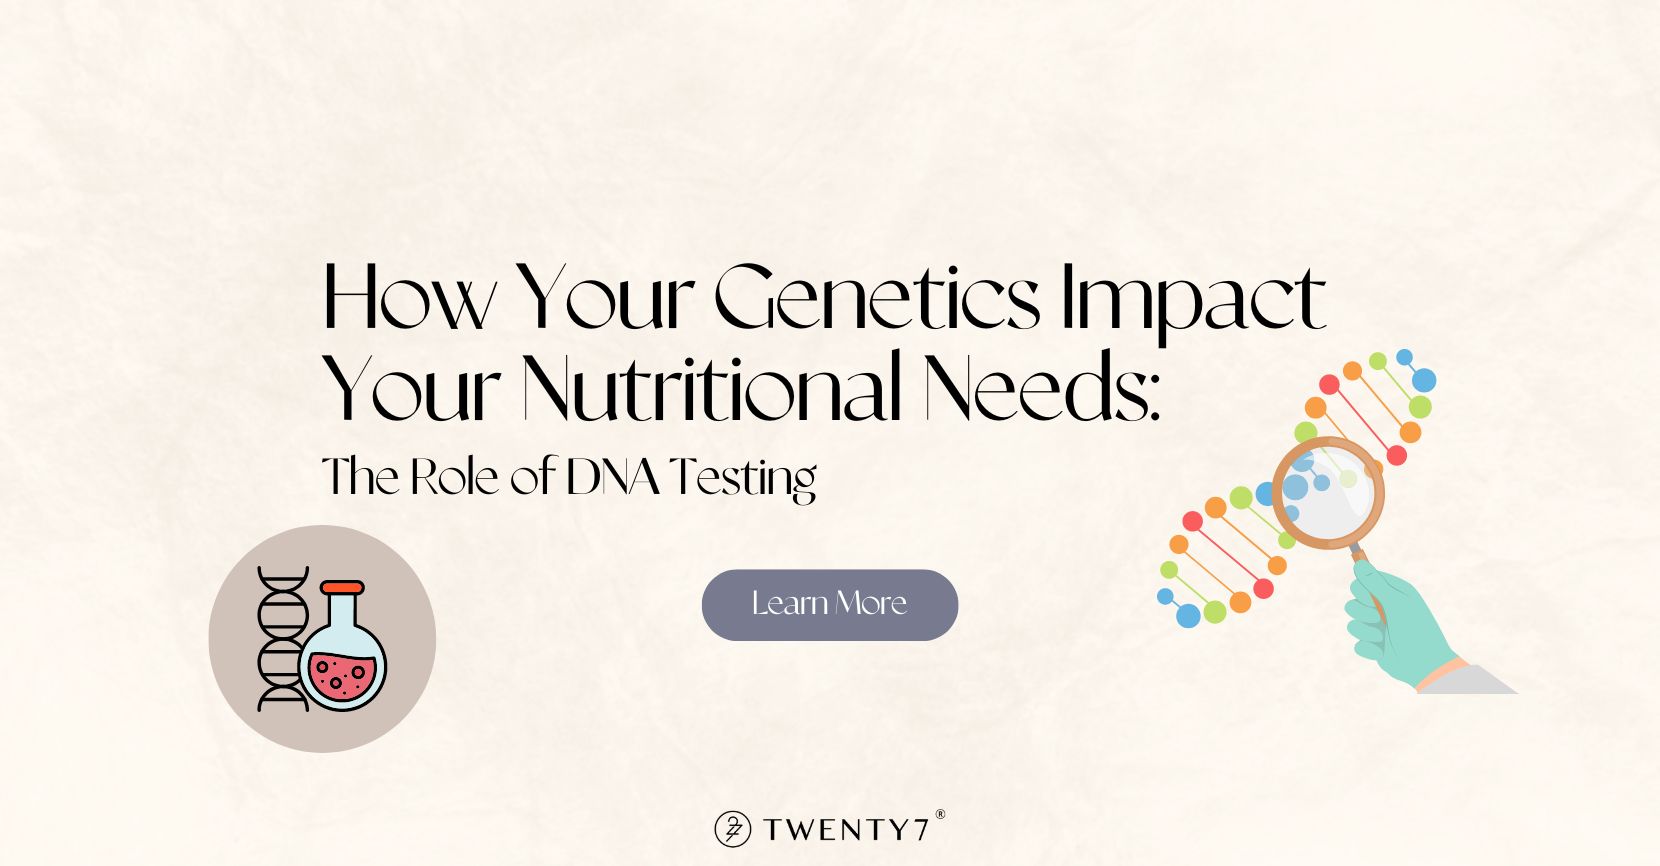 How Your Genetics Impact Your Nutritional Needs: The Role of DNA Testing